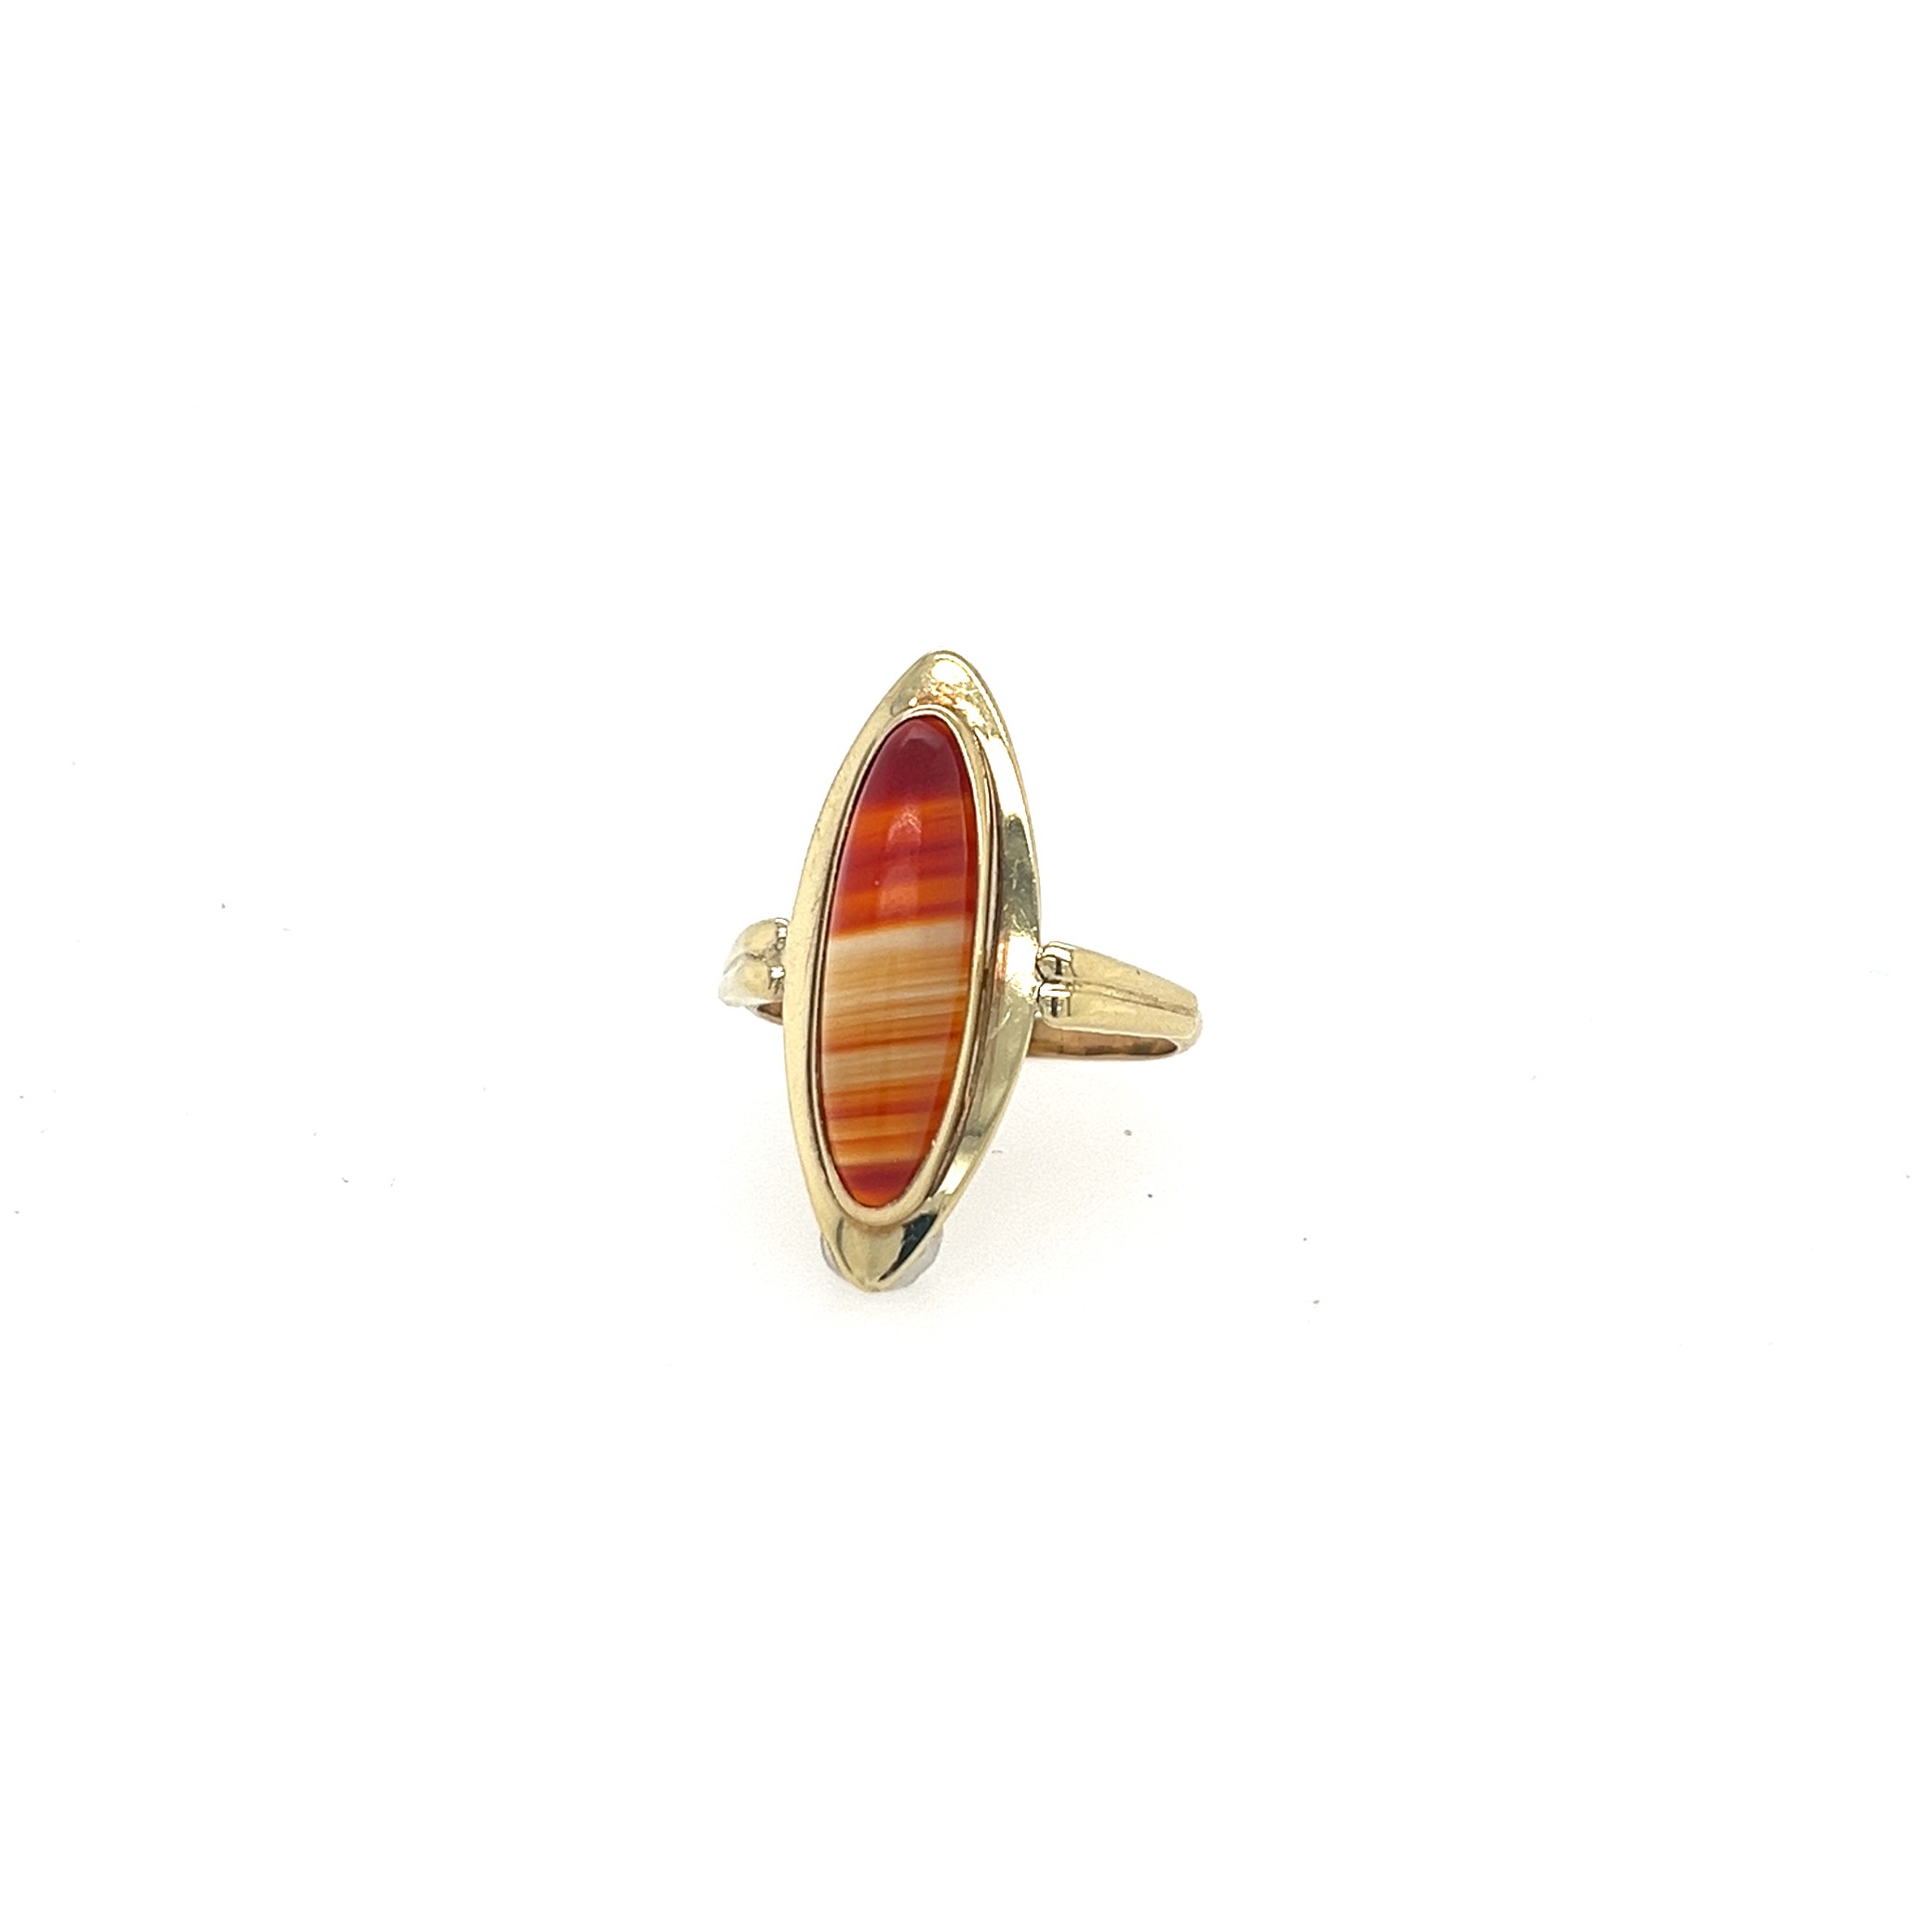 Vintage Jewelry – 14KT Gold - Ring Agate with Stripes